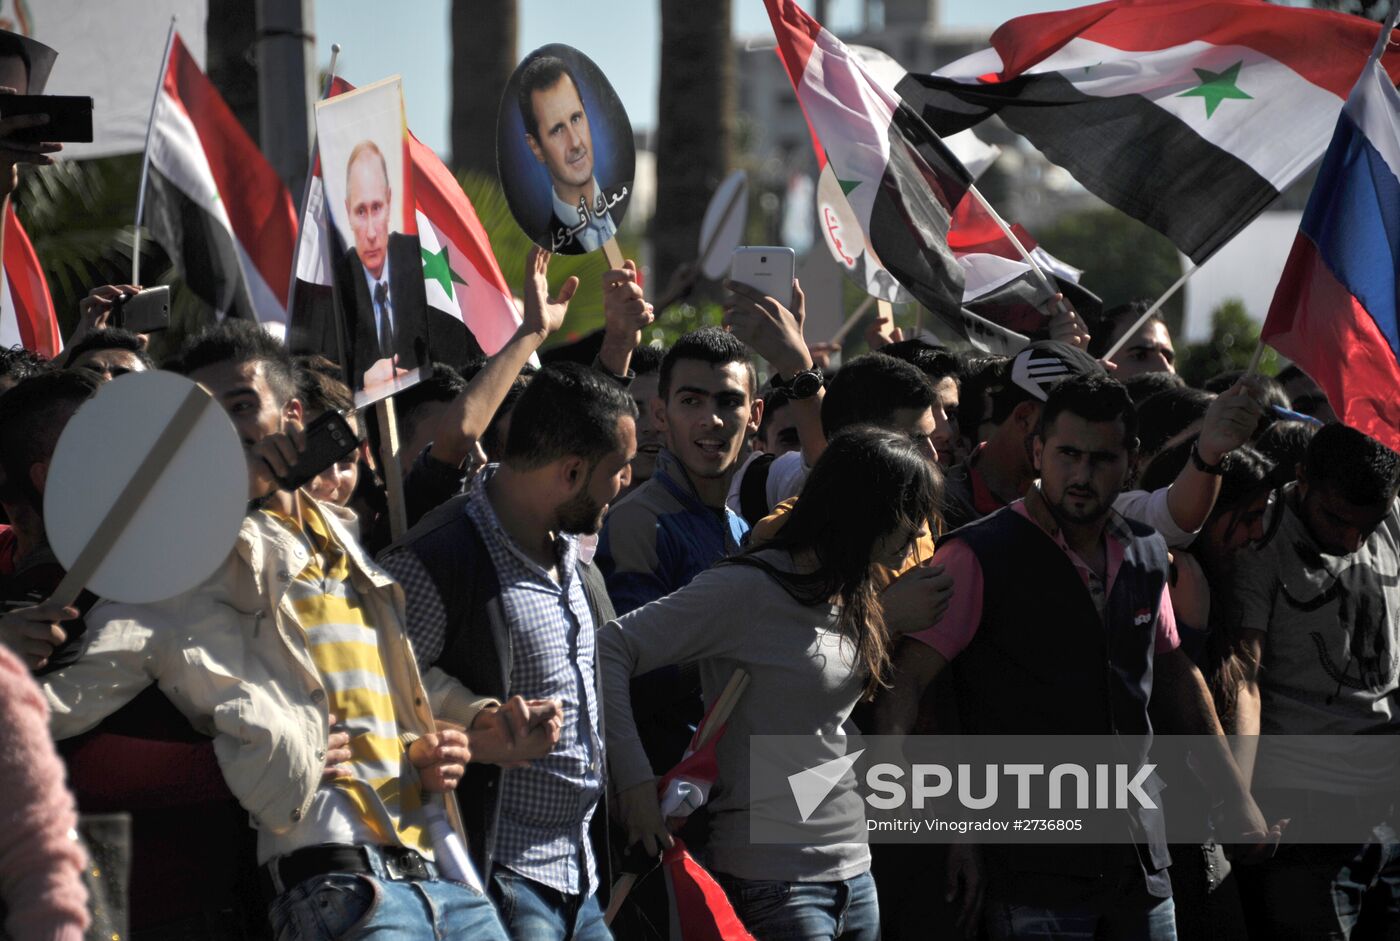 Rally in Tartus in support of Russian air force operation